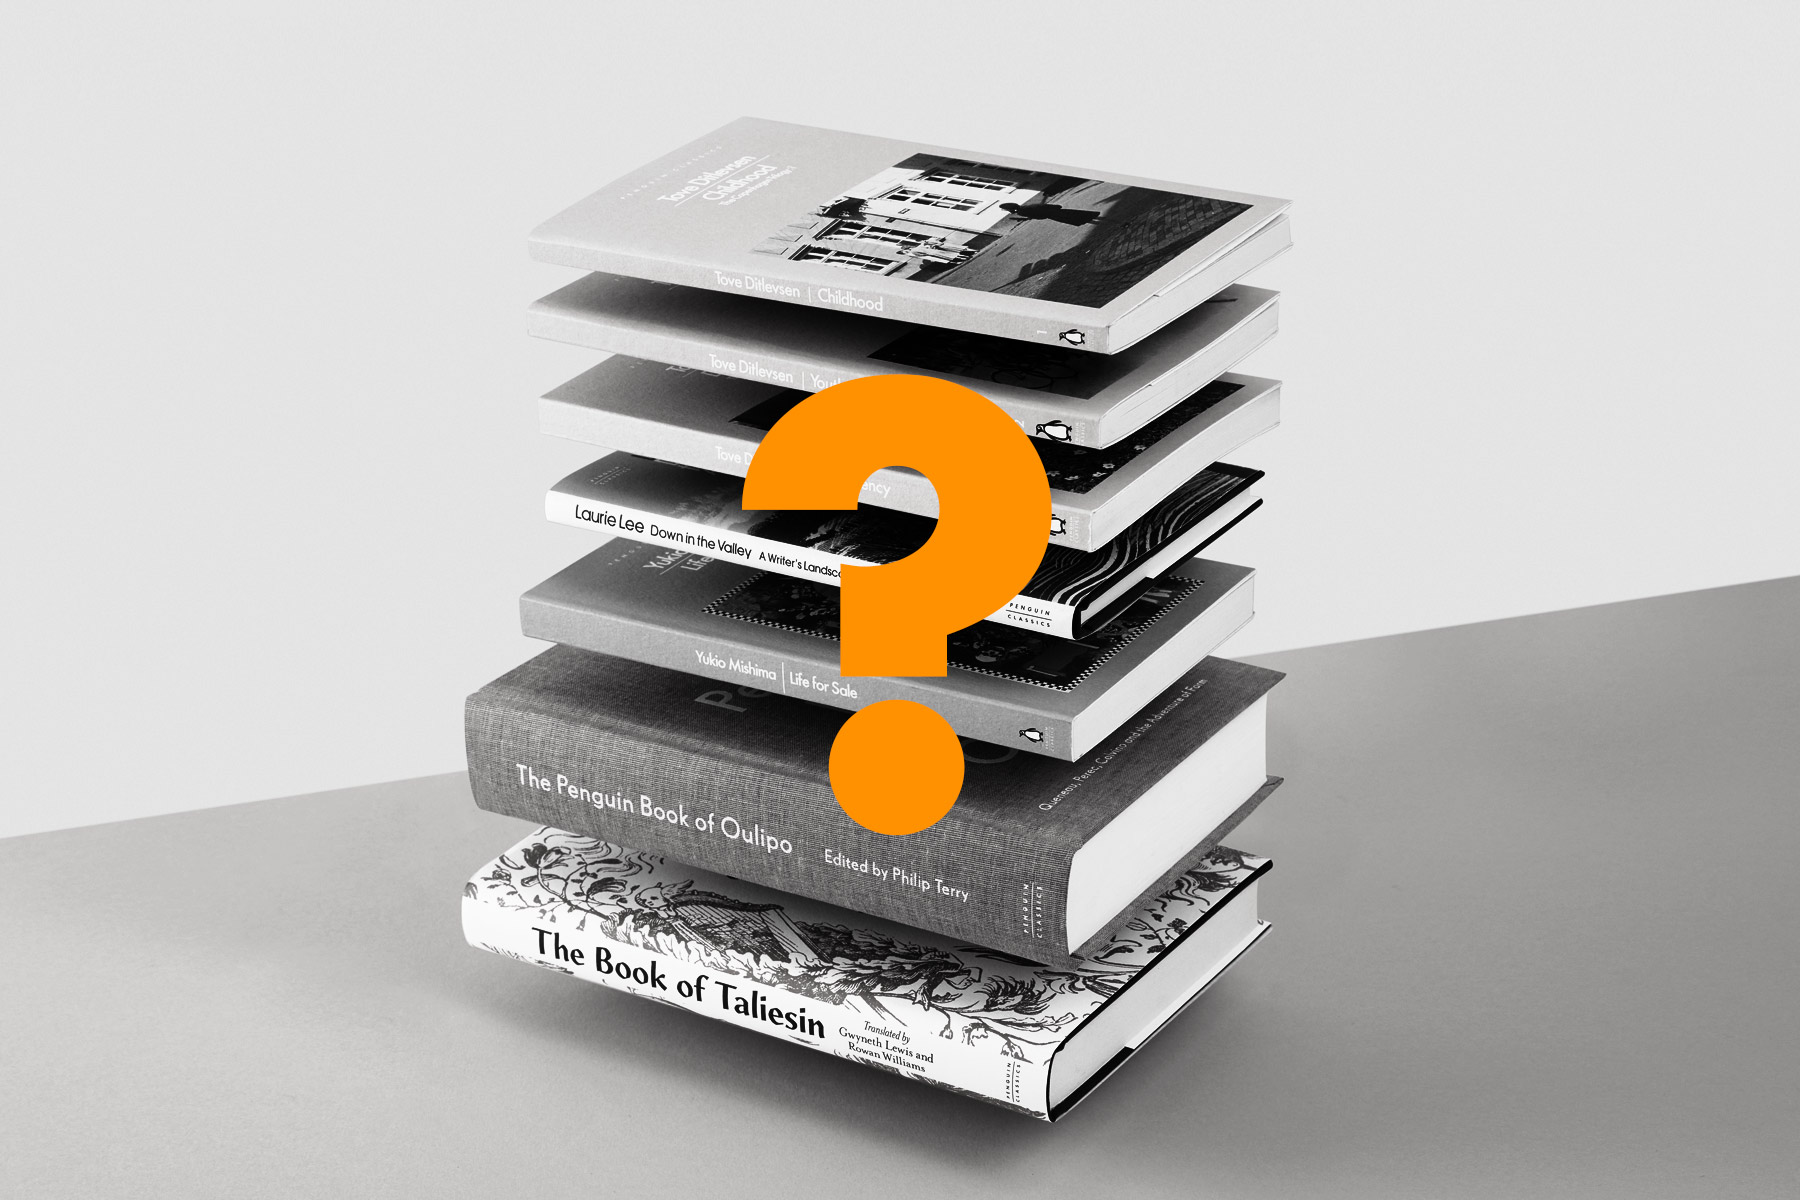 A pile of books in grayscale, with an orange question mark overlaid.